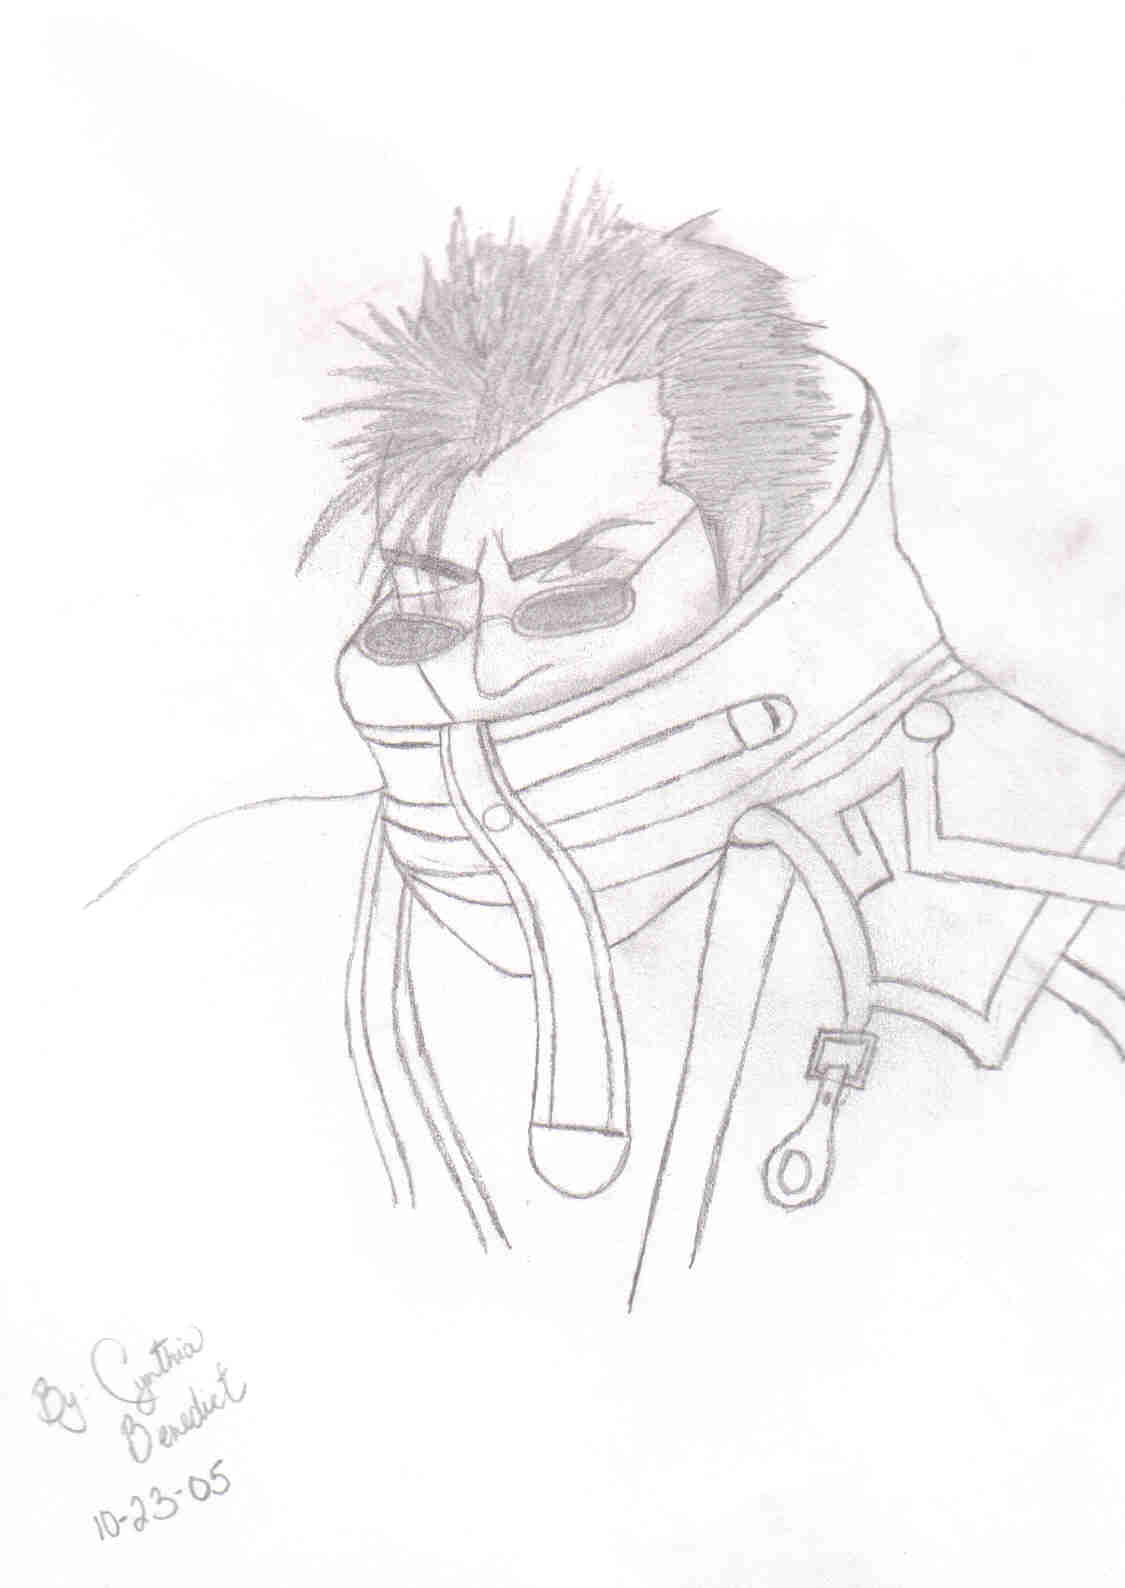 Auron #1 by Anime_chica07